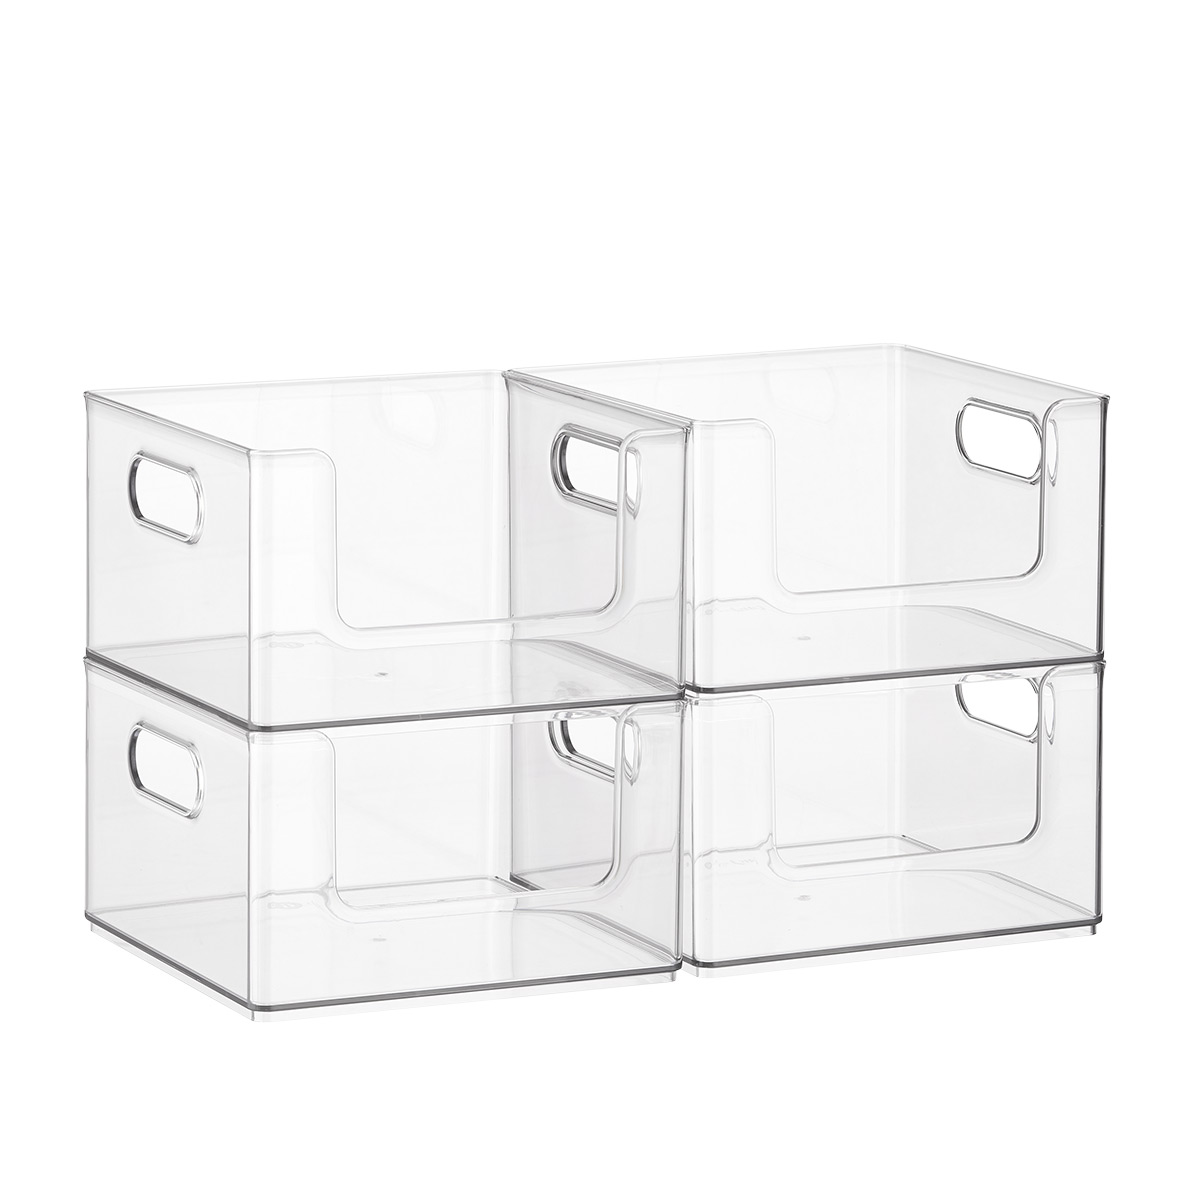 https://www.containerstore.com/catalogimages/406678/10082481-The-Home-Edit-stacking-pant.jpg